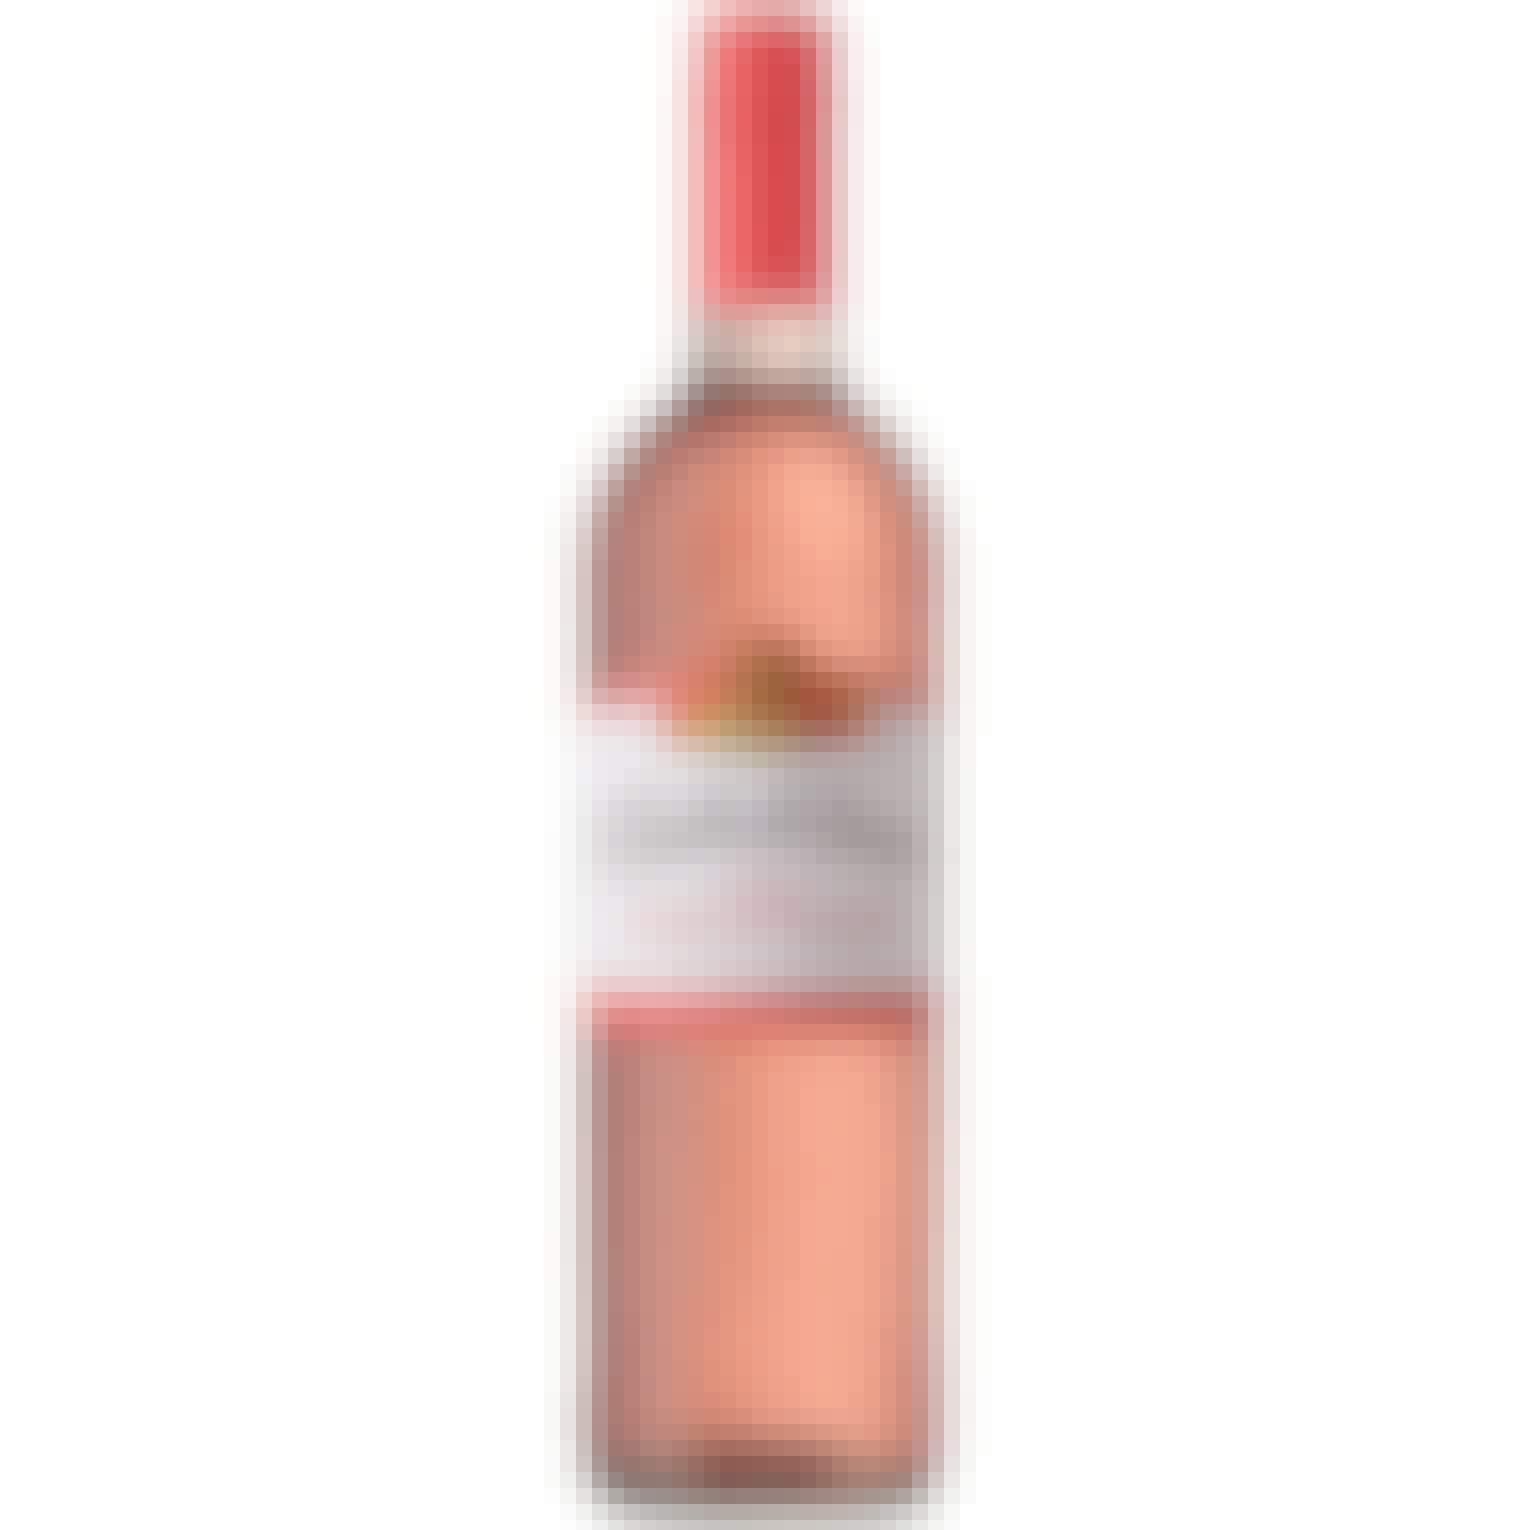 Carlo Rossi Pink Moscato Sangria 750ml